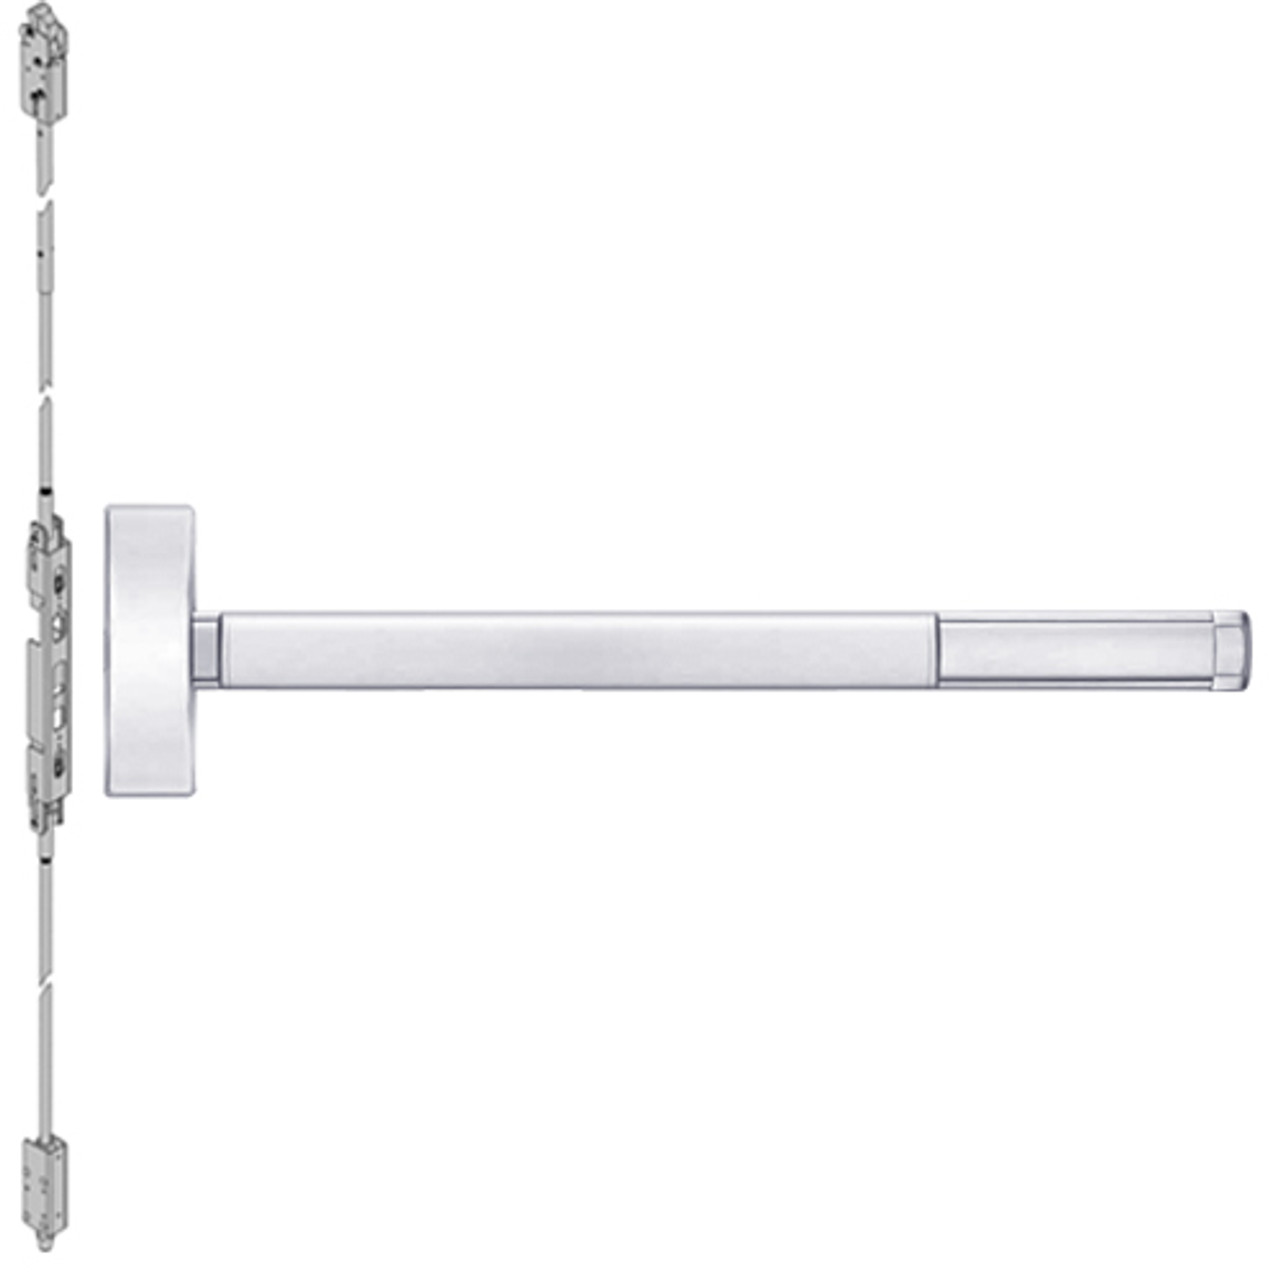 2815LBRCD-625-36 PHI 2800 Series Non Fire Rated Concealed Vertical Rod Exit Device Prepped for Thumbpiece Always Active in Bright Chrome Finish